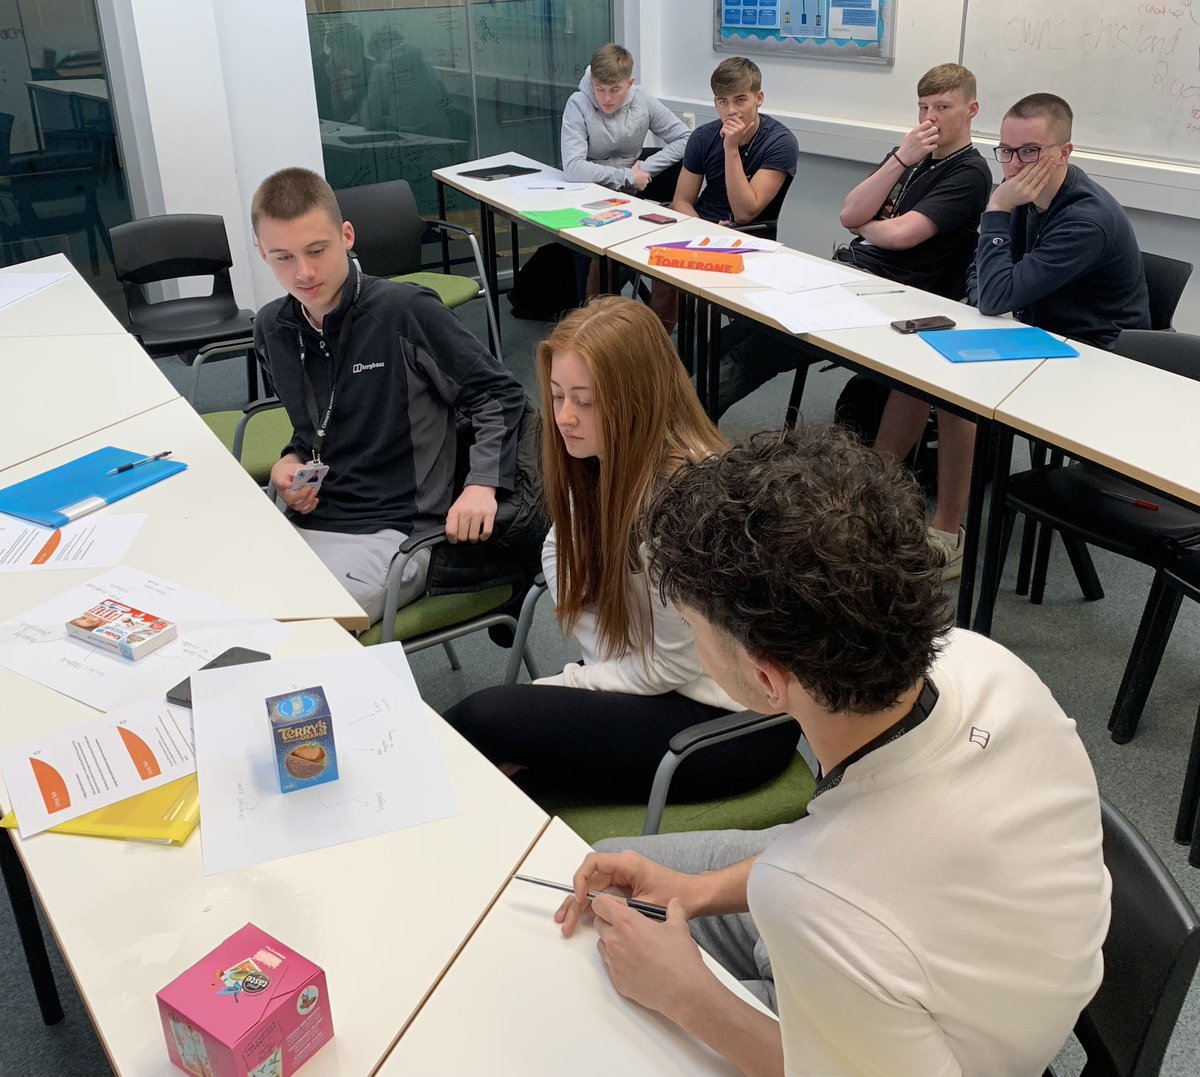 A busy morning looking at marketing techniques as part of our @Consettacademy Youth Employability Programme. Huge thanks to @NewcastleBSoc & @CFTyneWearNland & #TheAlbertHuntTrust for their kind support of this work 💚👏👏